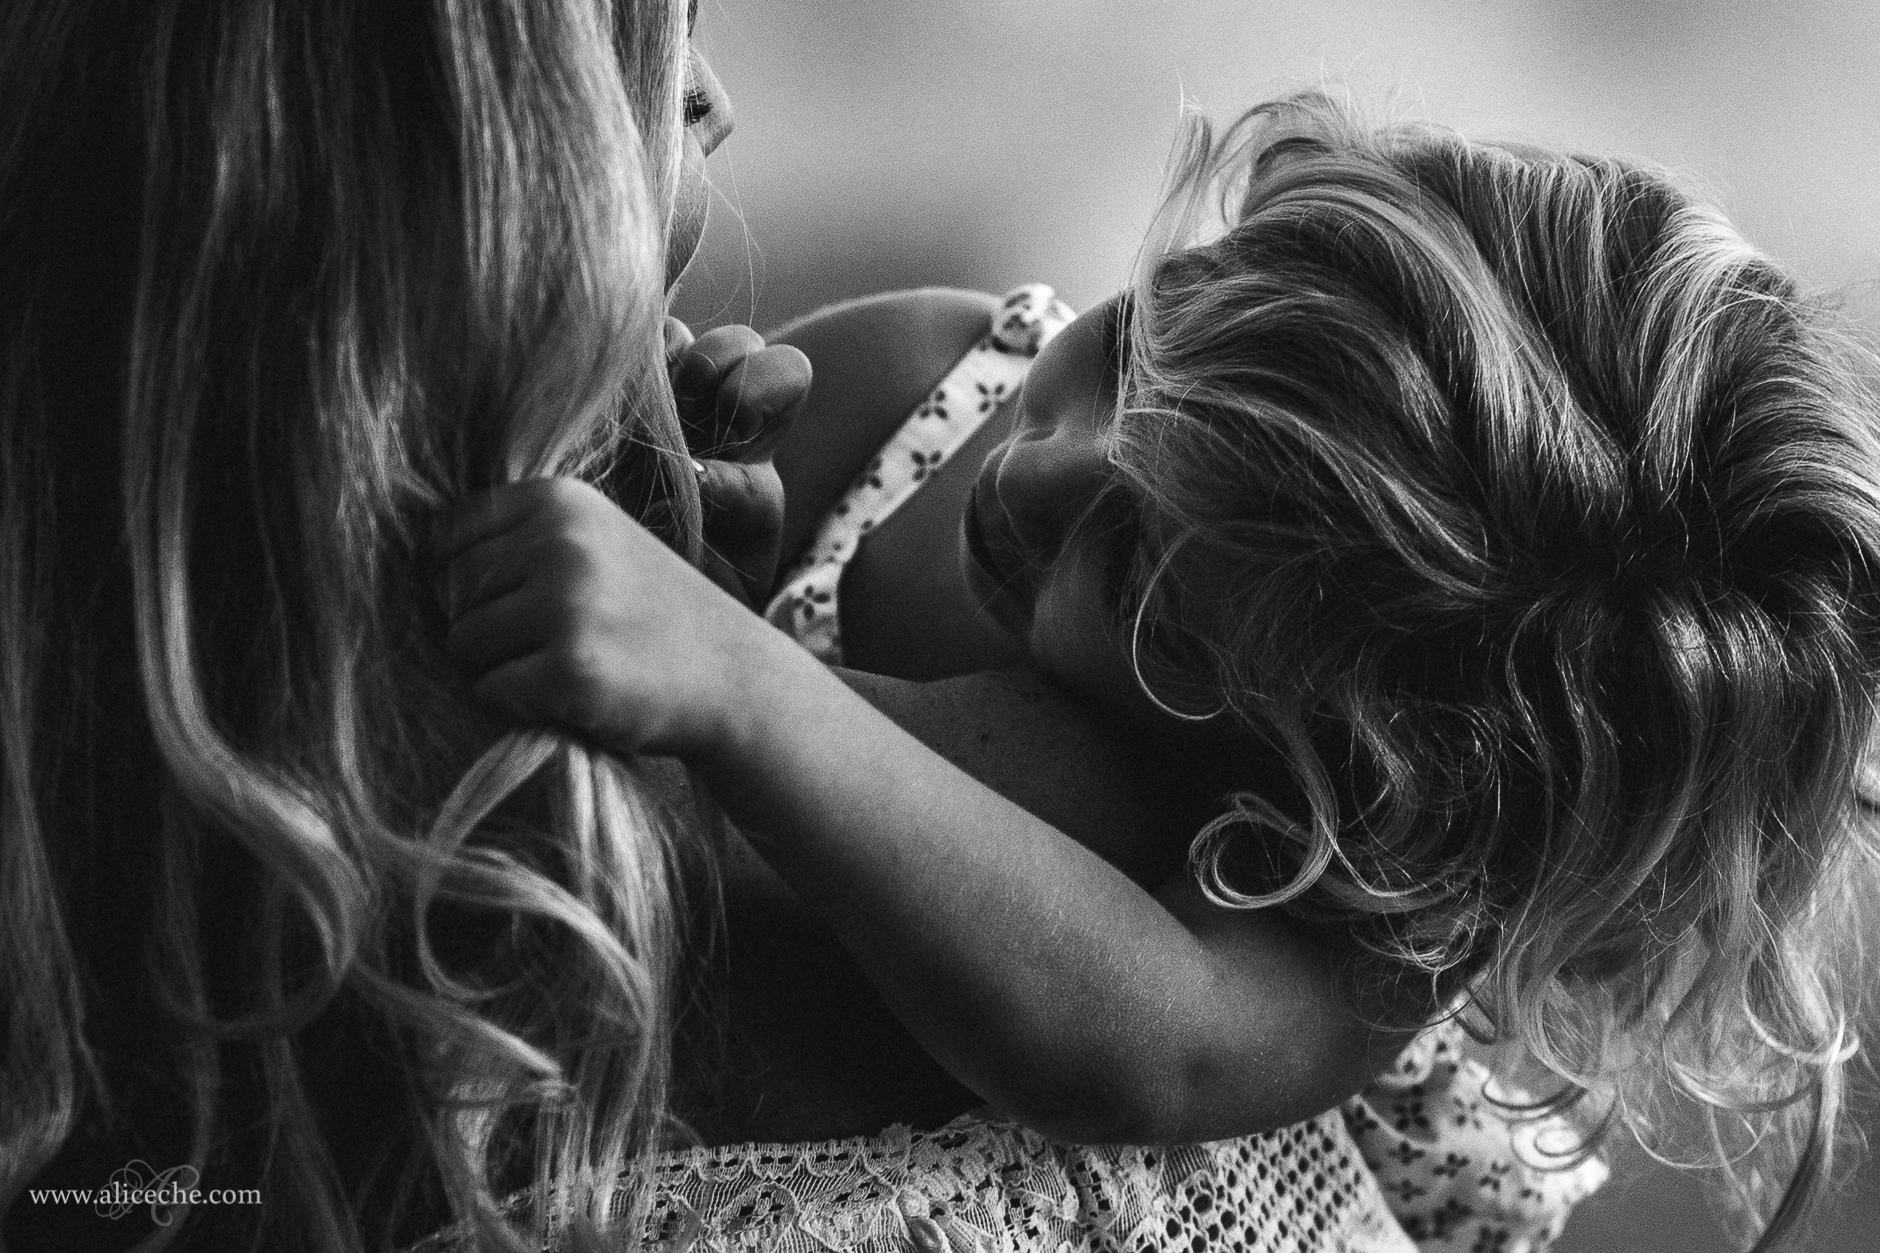 alice-che-photography-blair-thurston-retreat-malibu-family-session-girl-playing-with-moms-hair-intimate-close-portrait